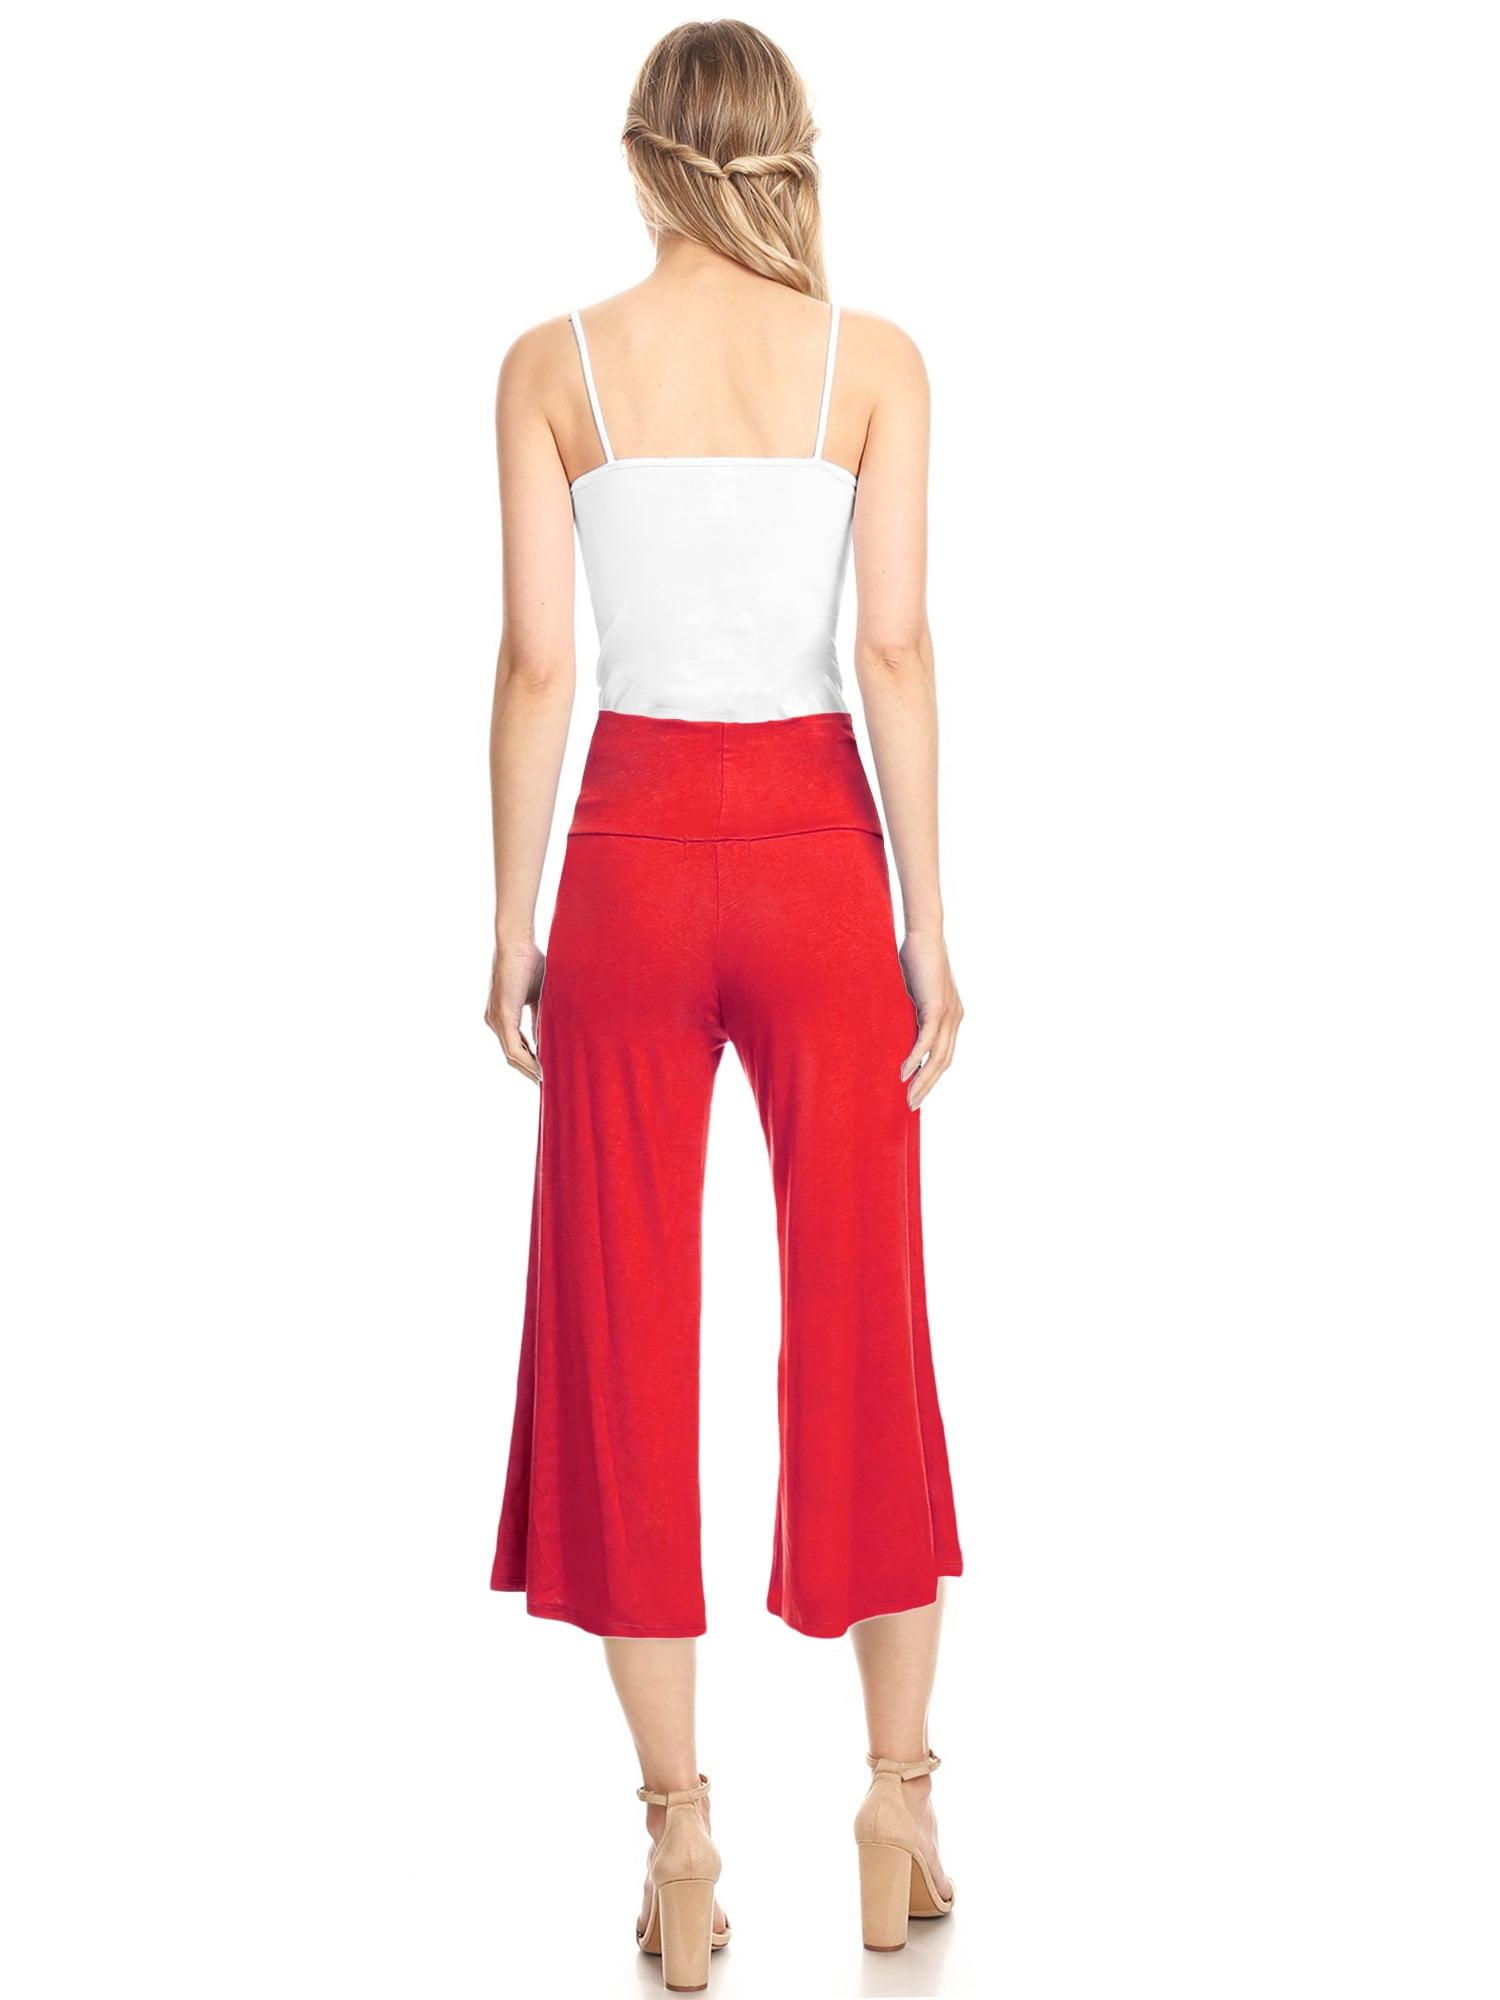 Pants Knit Johnny by Culottes RED Made L Women\'s